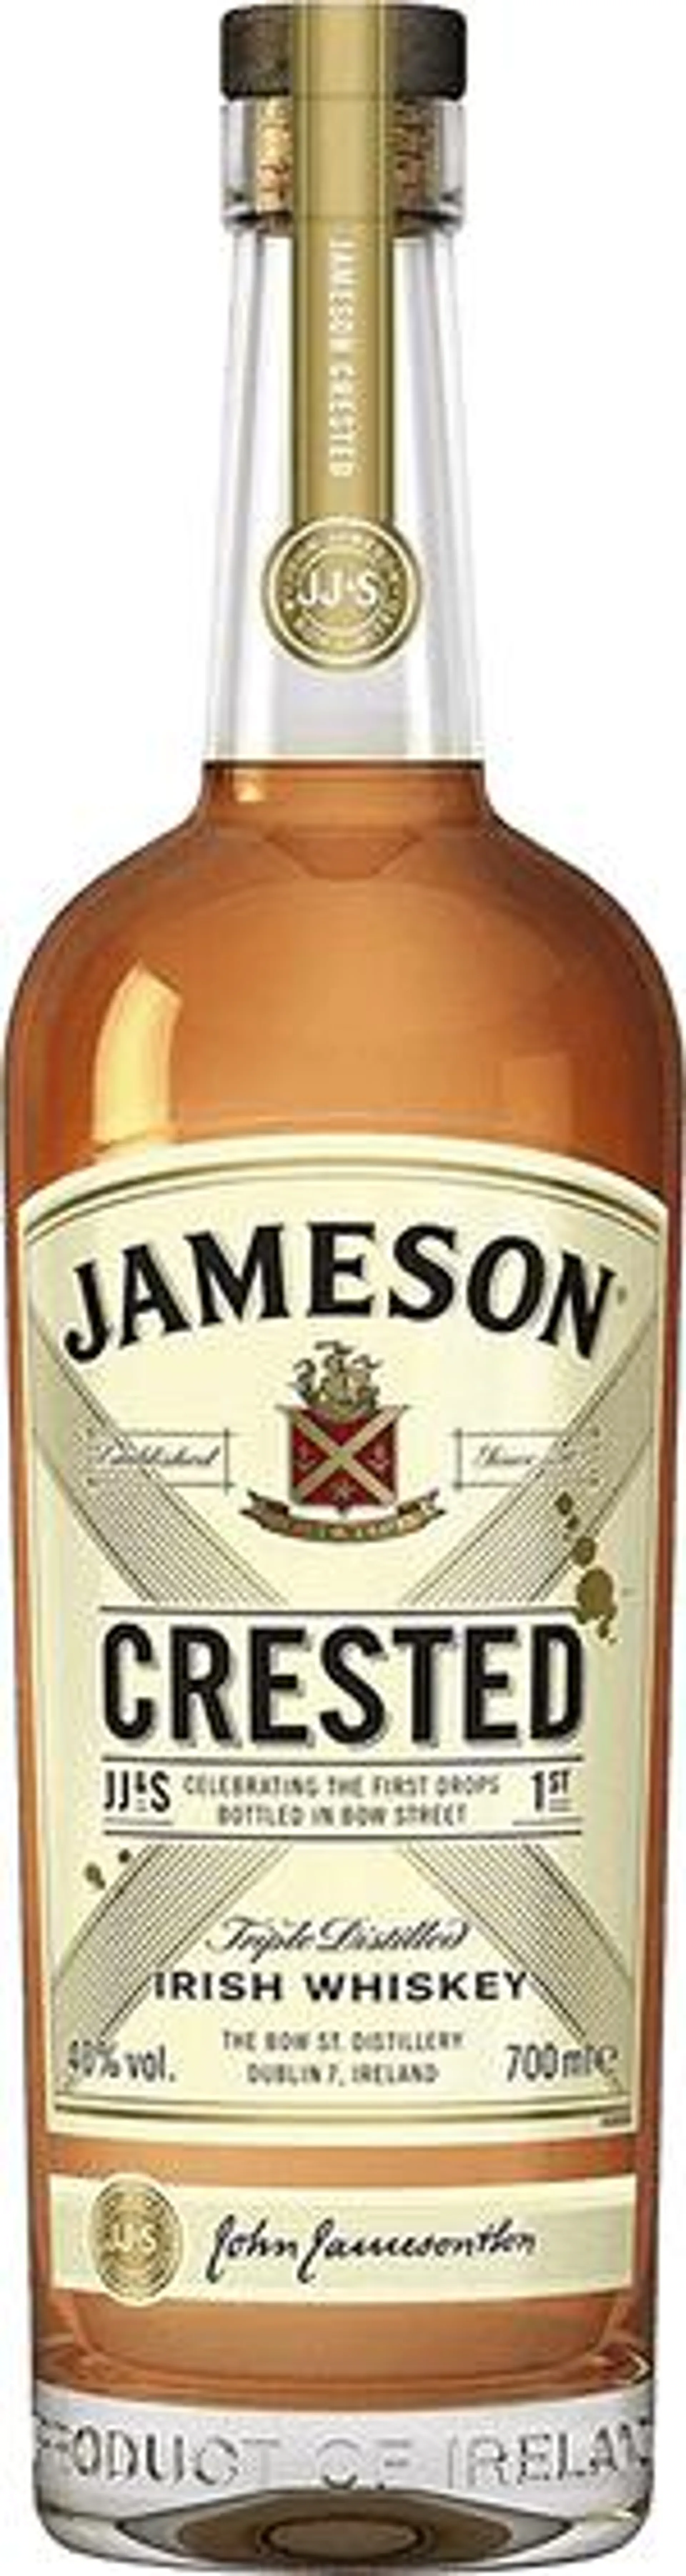 Jameson Crested Whiskey 70cl